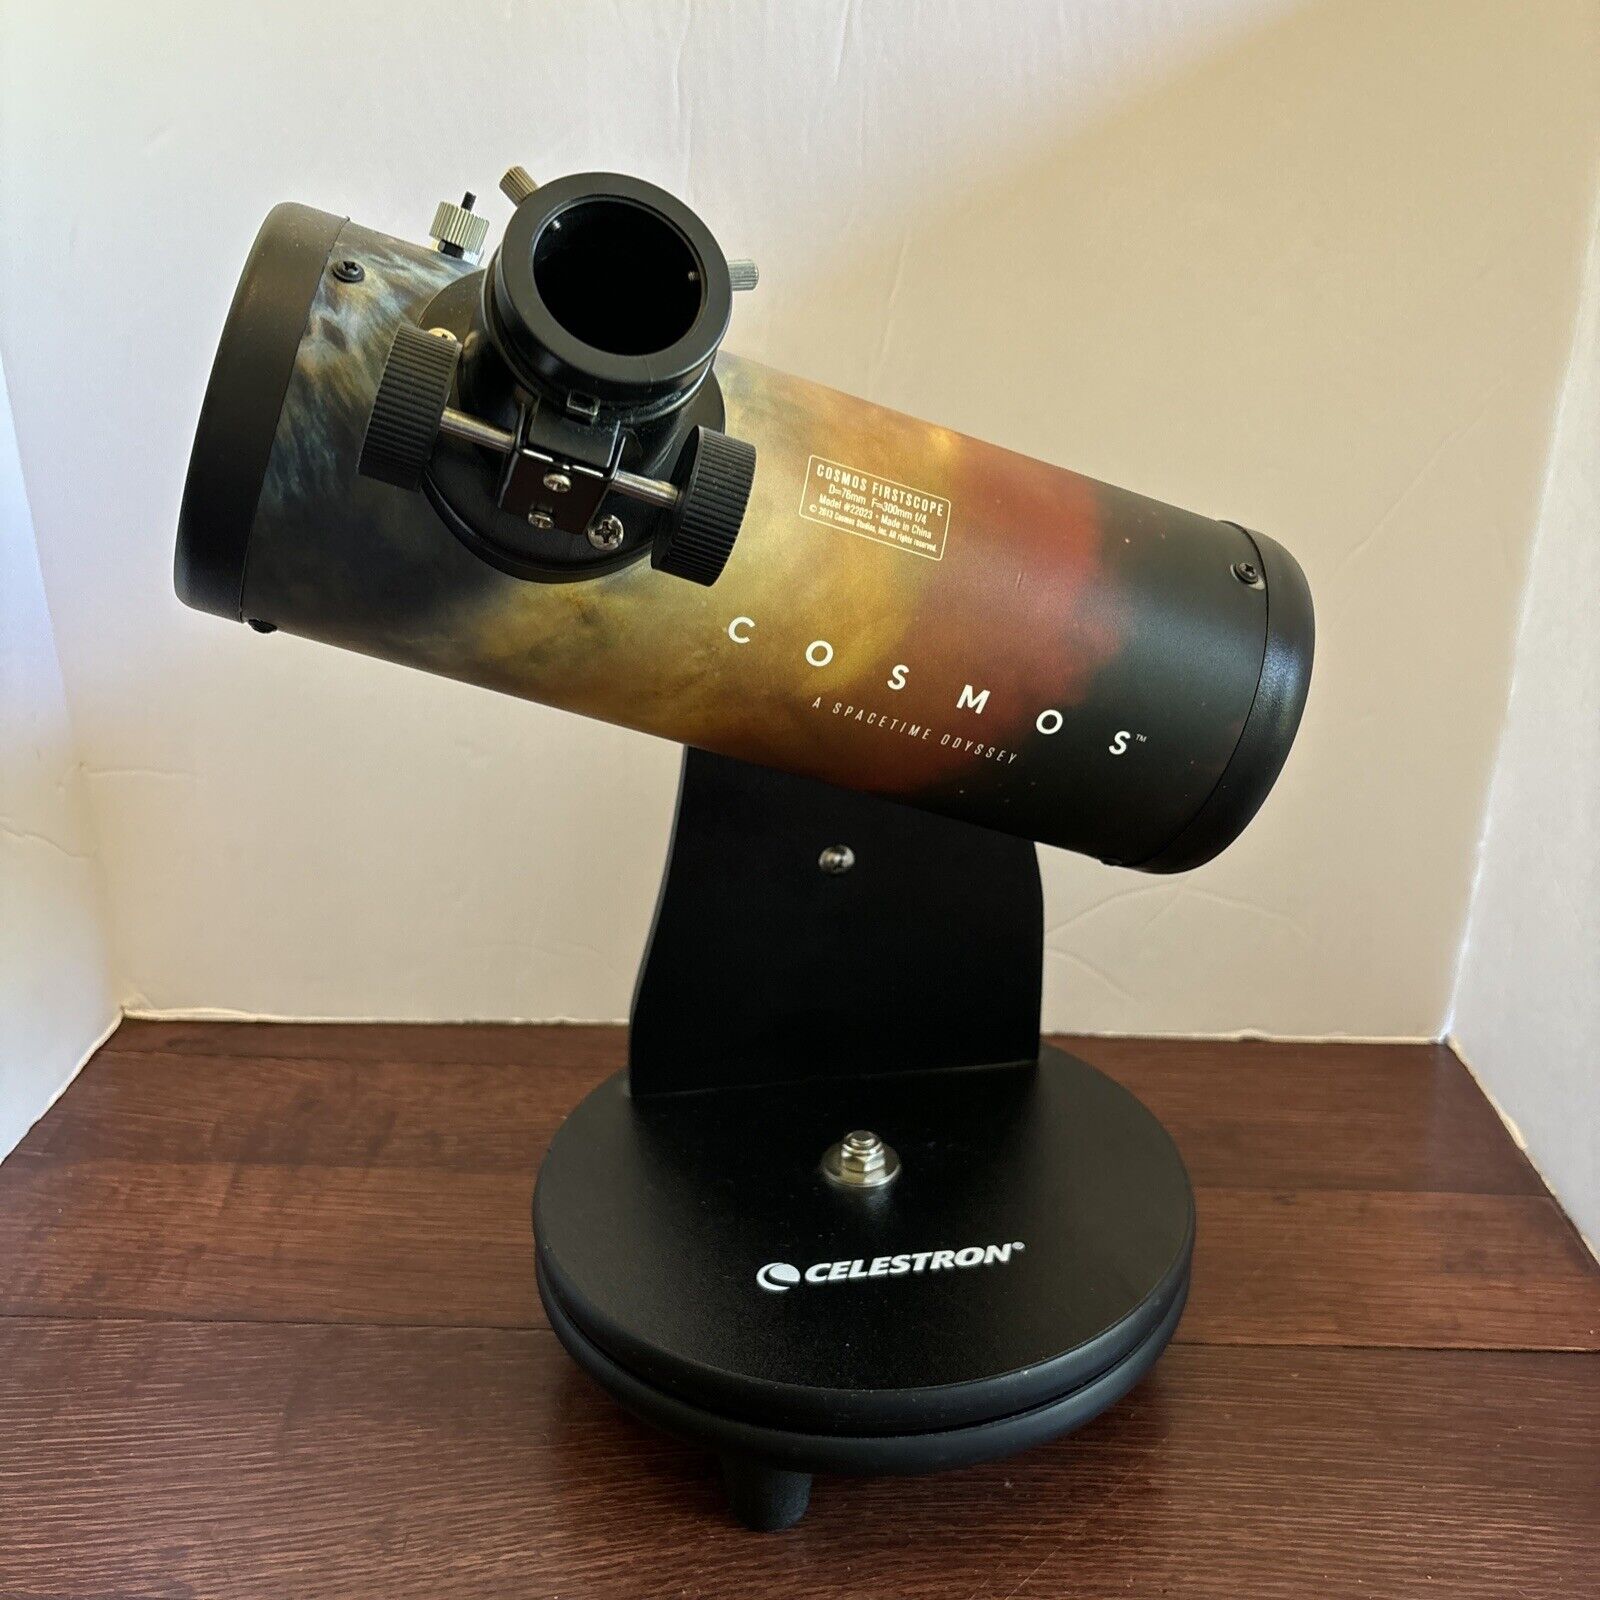 Celestron Cosmos Firstscope D=76mm F=300mm f/4,Model 22023 ‘13 Spacetime Odyssey